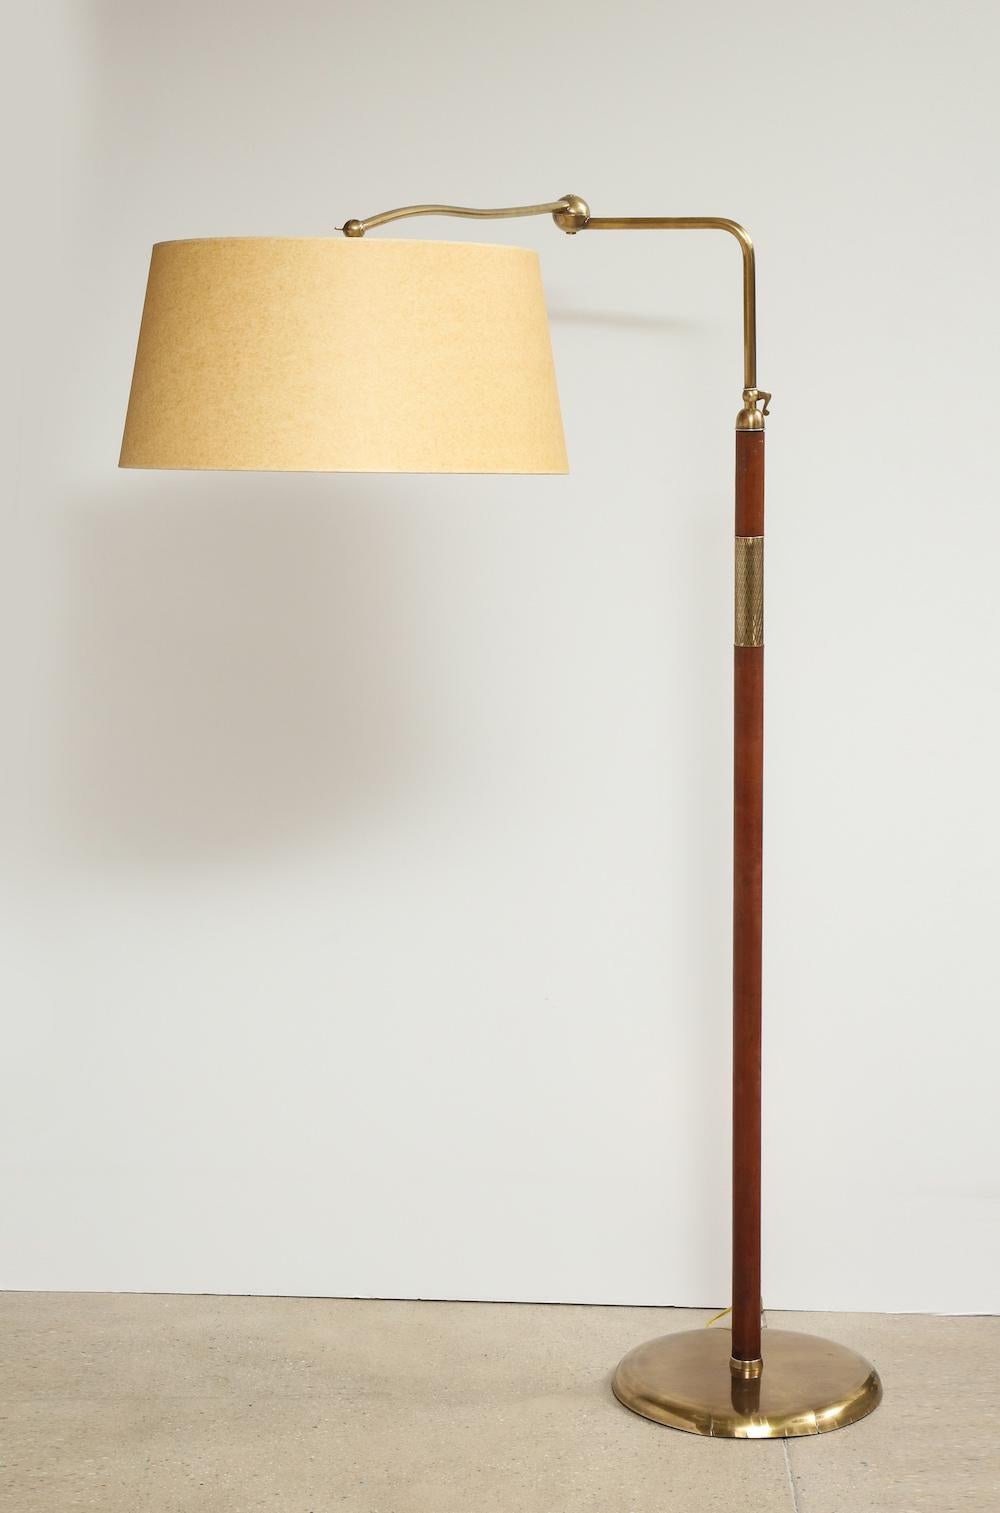 No. 12246, floor lamp by Angelo Lelli for Arredoluce. Adjustable floor lamp with leather wrapped standard that adjusts up or down. Top arm pivots around and also extends. An early experimental model with a fantastic knuckle mechanism. Signed on